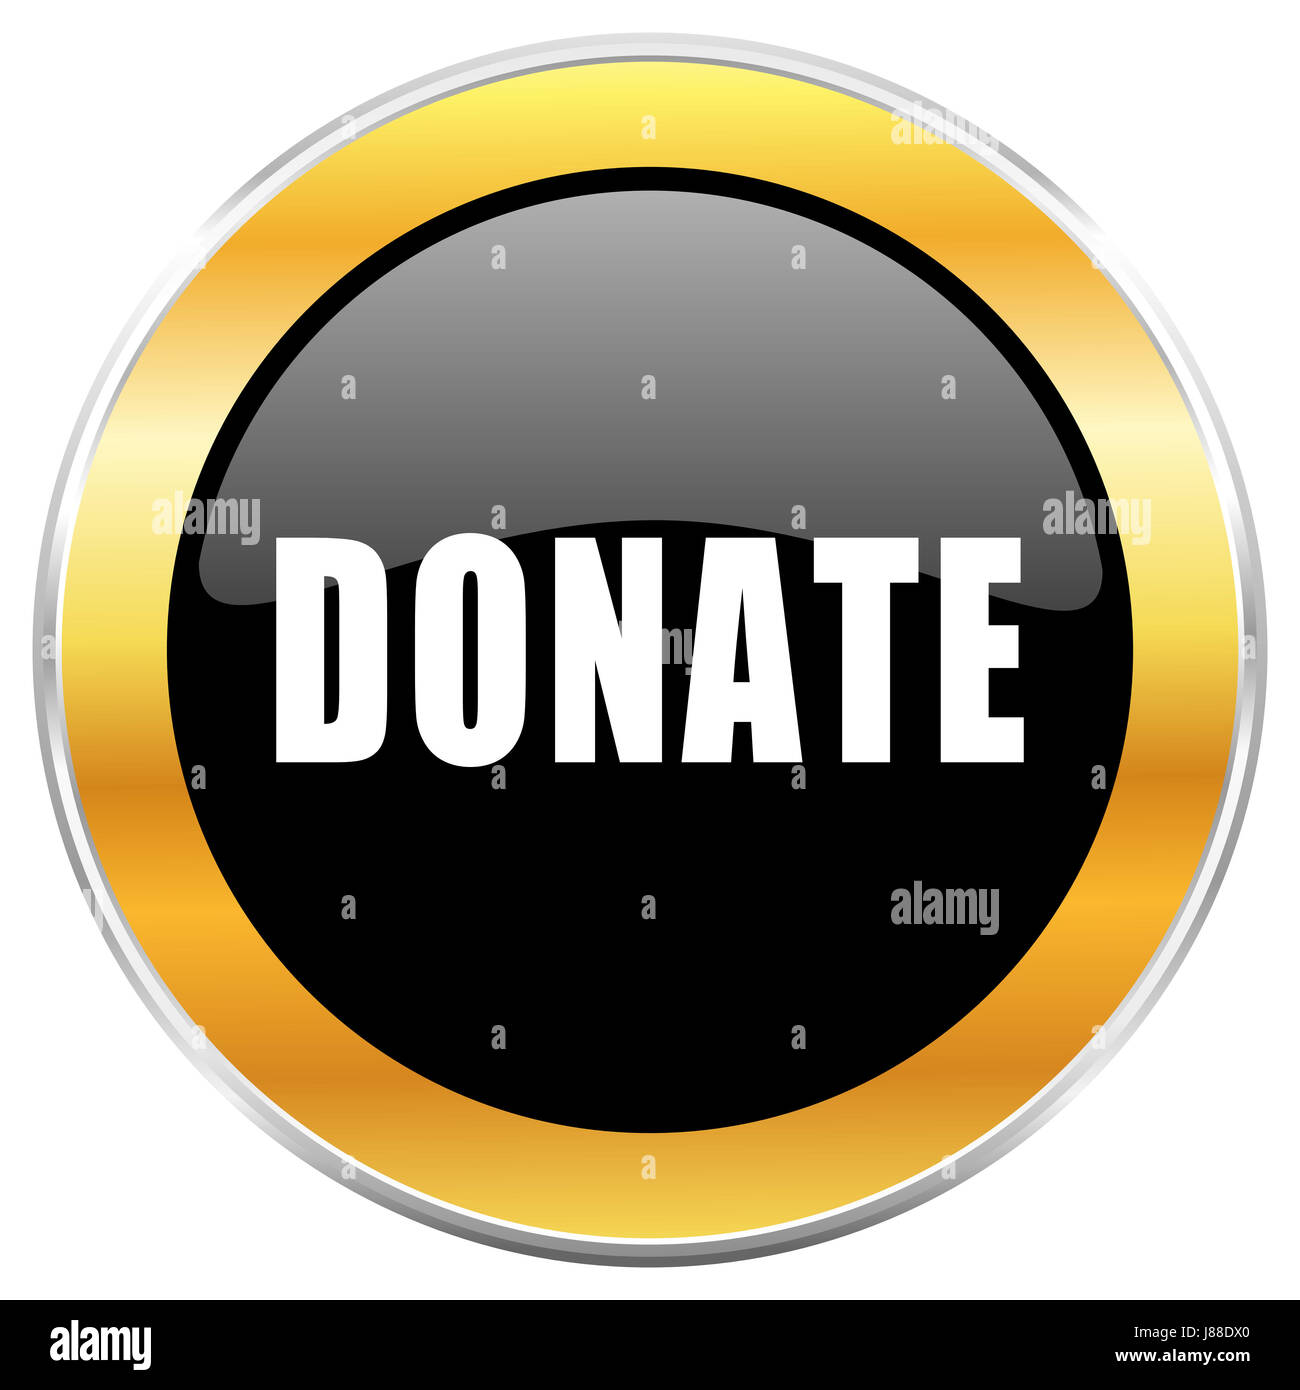 Donate black web icon with golden border isolated on white background. Round glossy button. Stock Photo